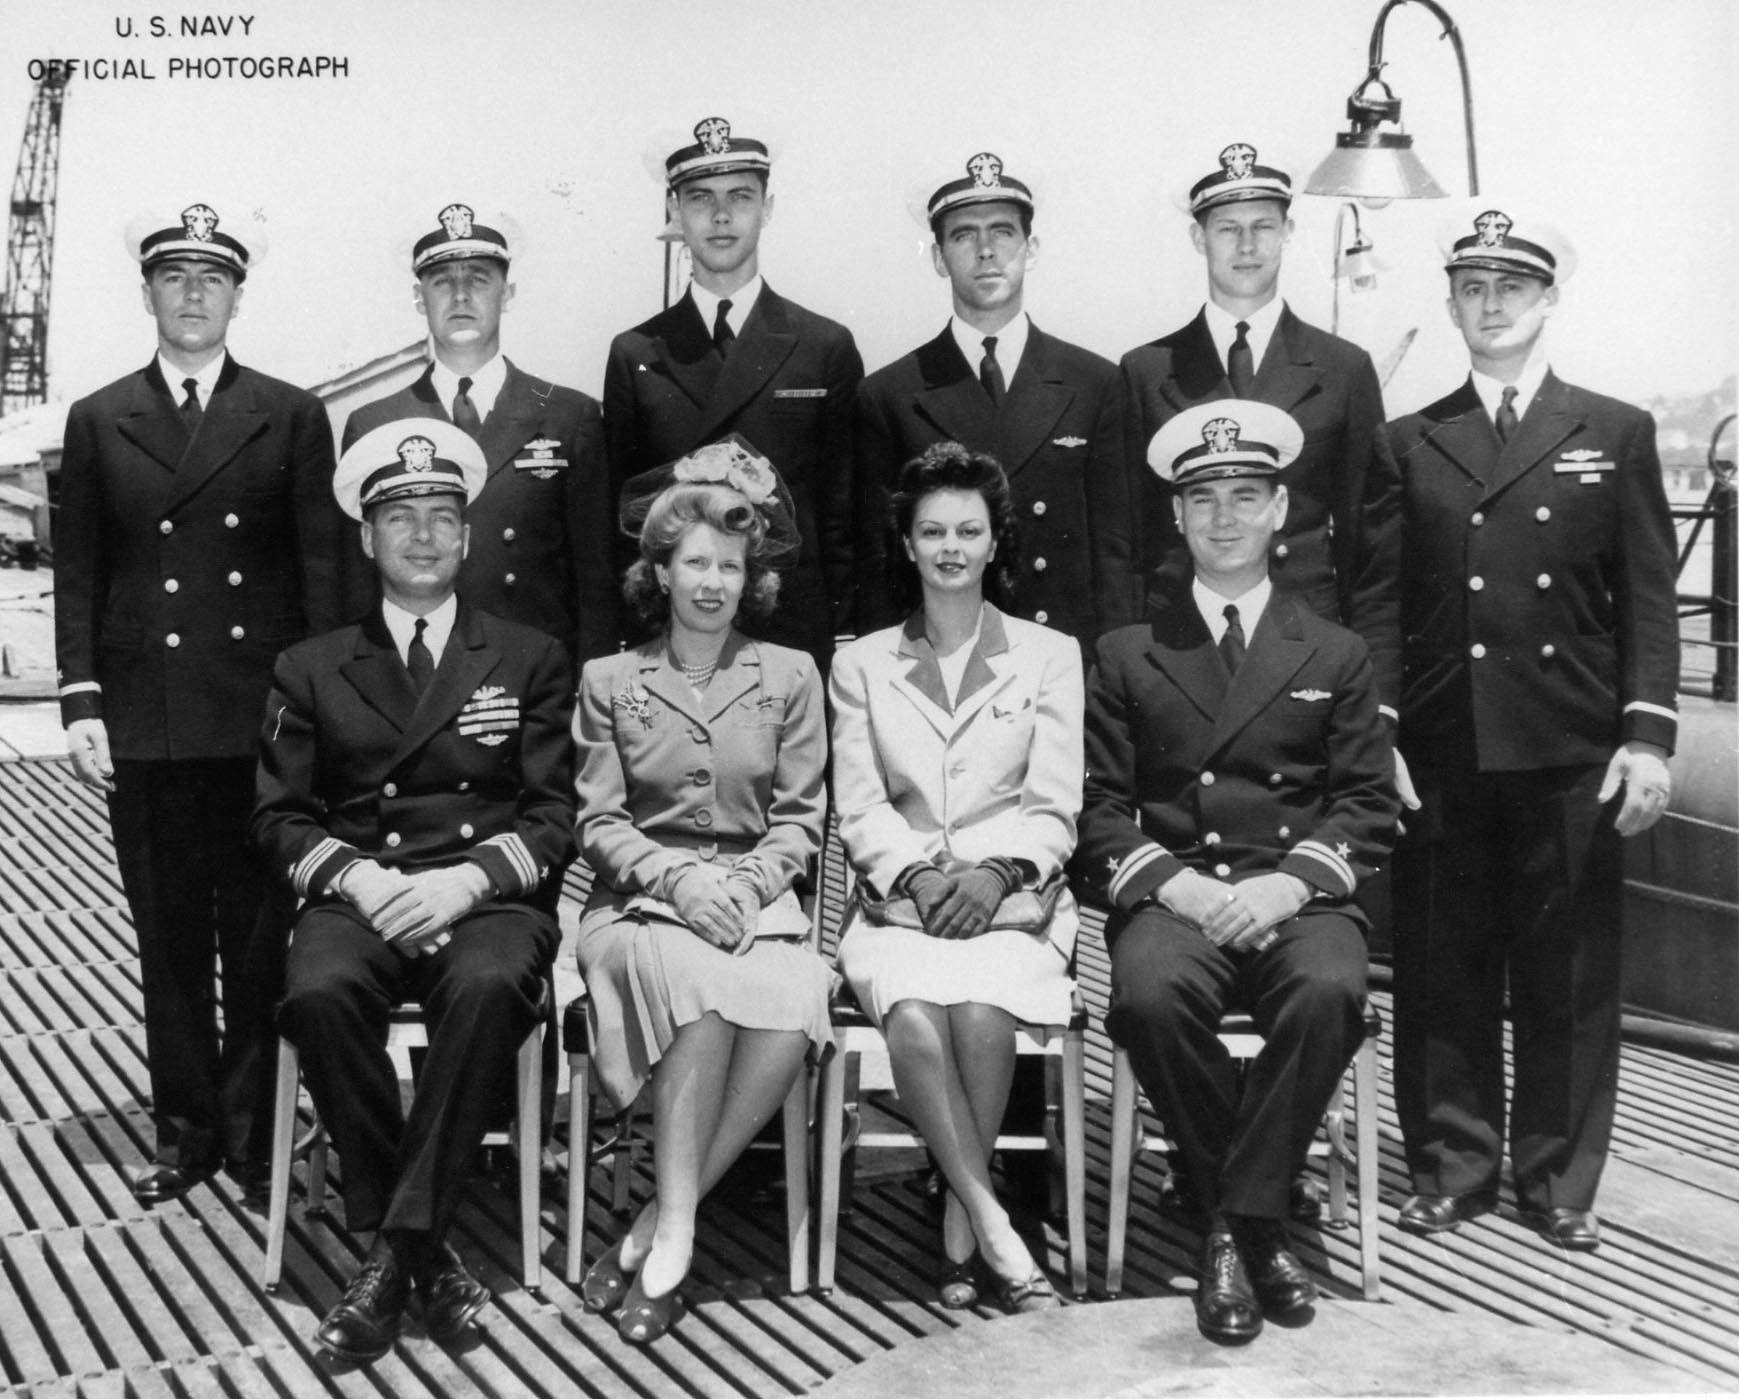 Commissioning party of USS Trepang, Mare Island Naval Shipyard, California, United States, 22 May 1944; Commander Roy Davenport seat at left of photograph